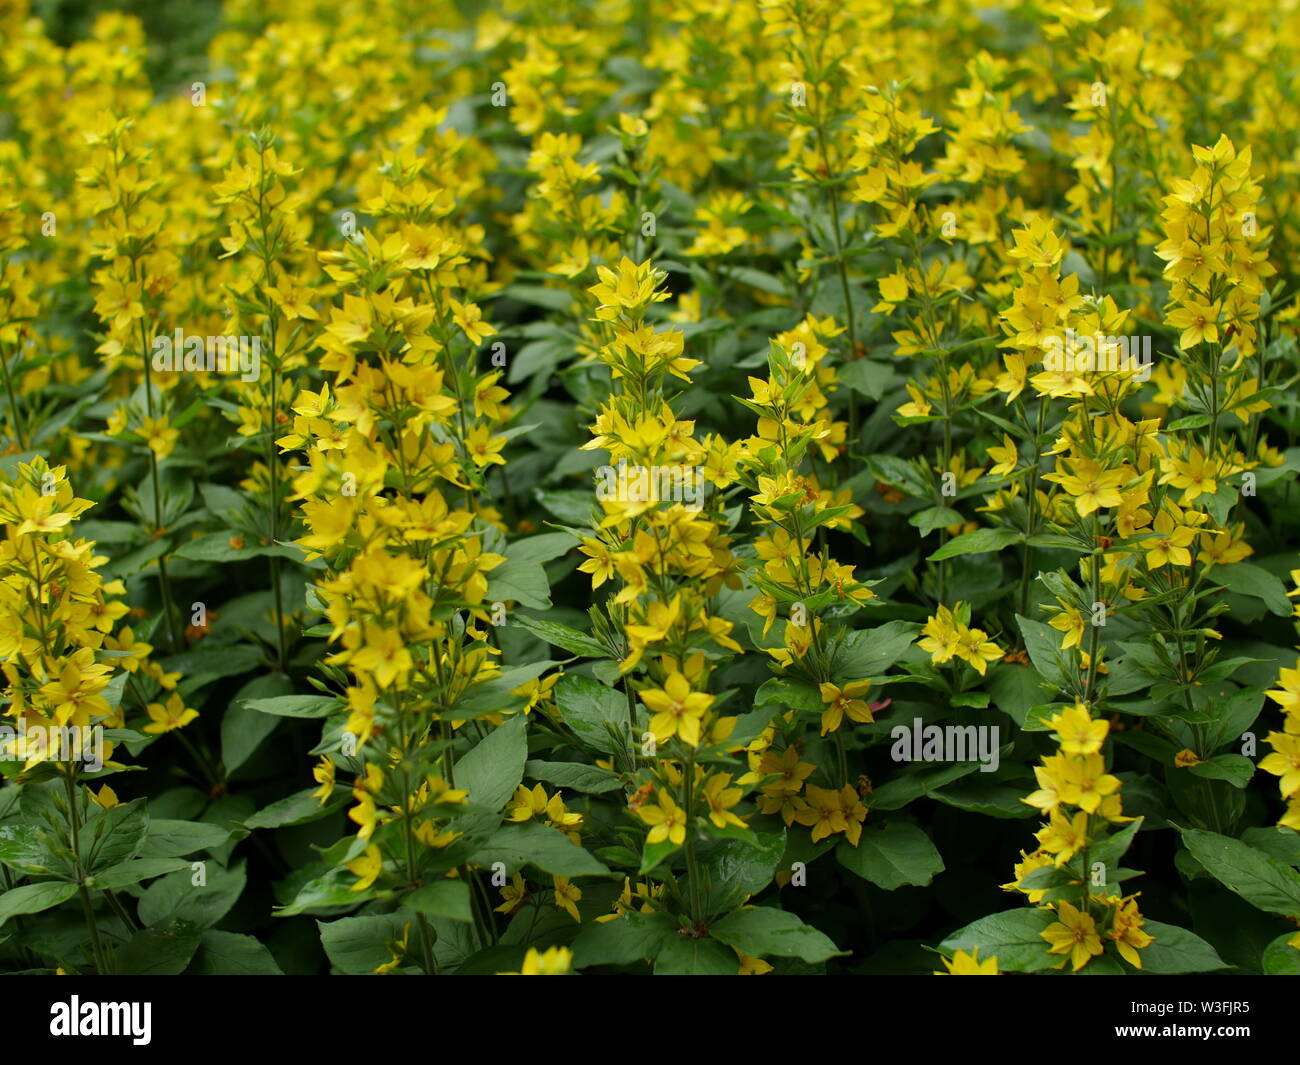 flowers loosestrife bright yellow inflorescences thickets, healing plant Stock Photo